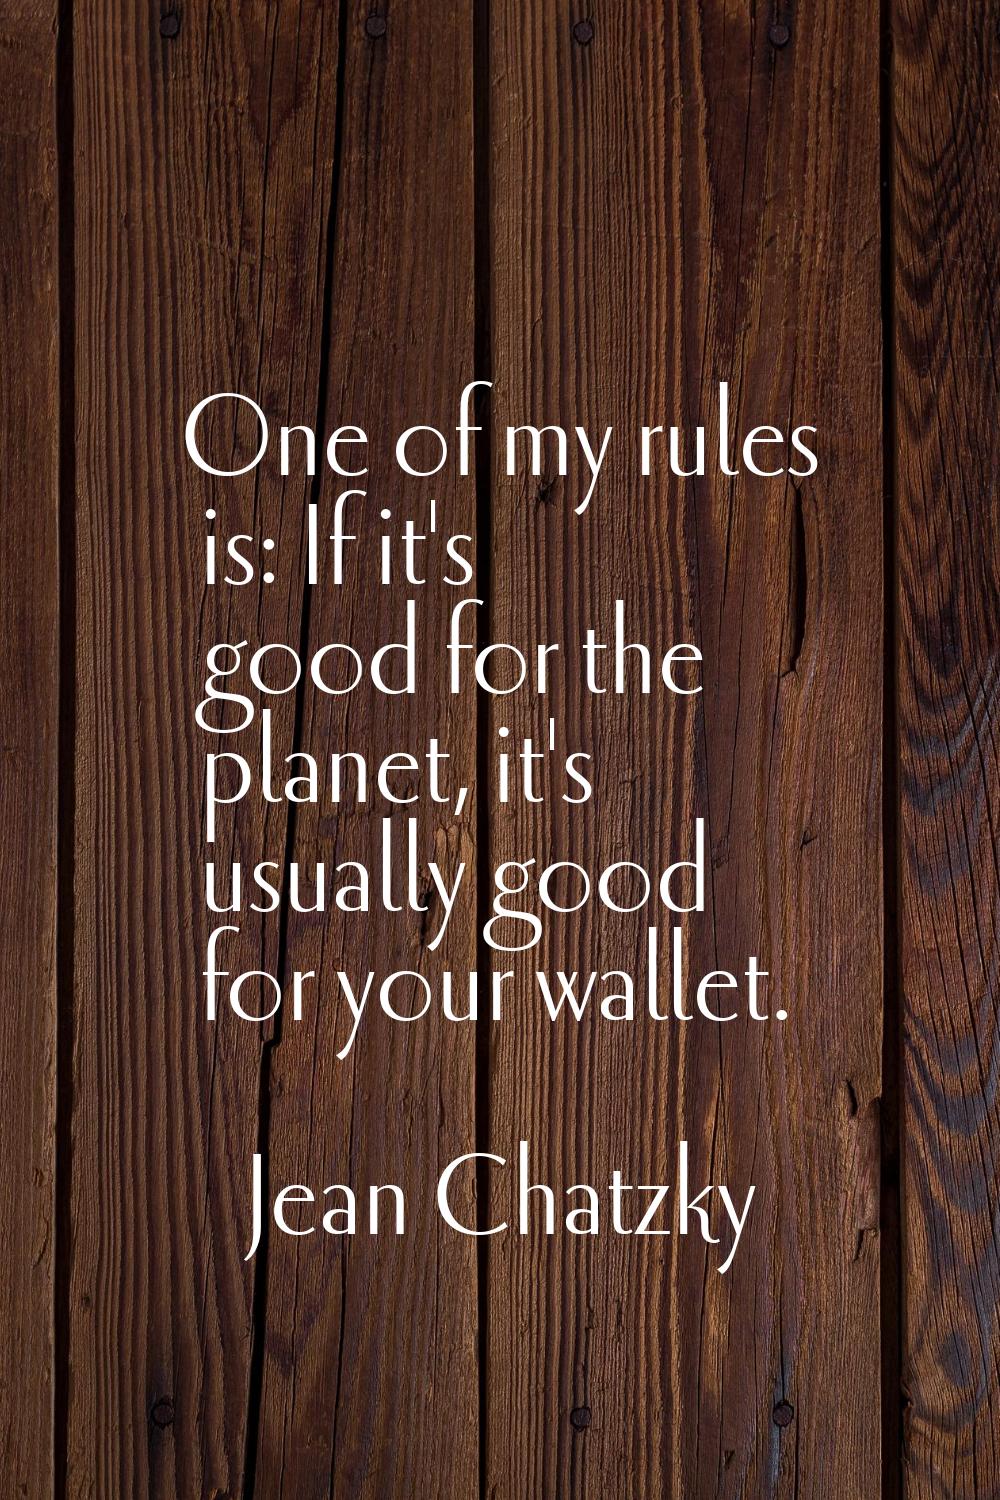 One of my rules is: If it's good for the planet, it's usually good for your wallet.